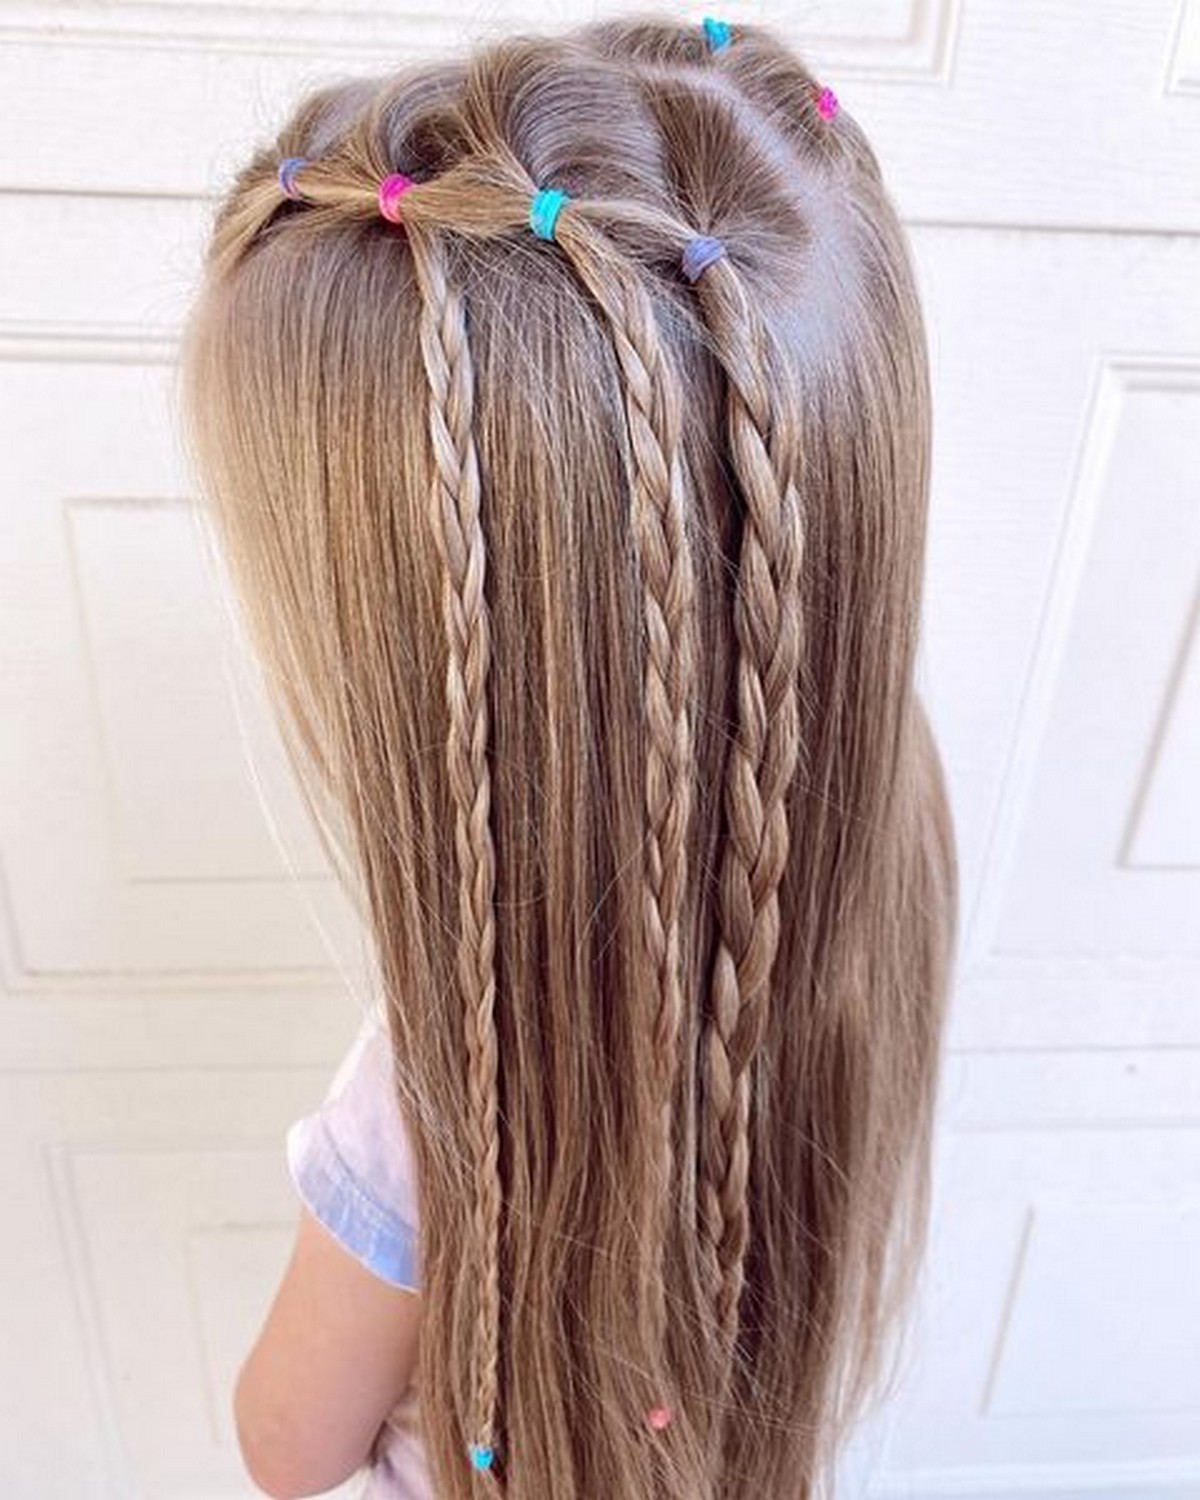 Long Hair With Thin Braided Layers